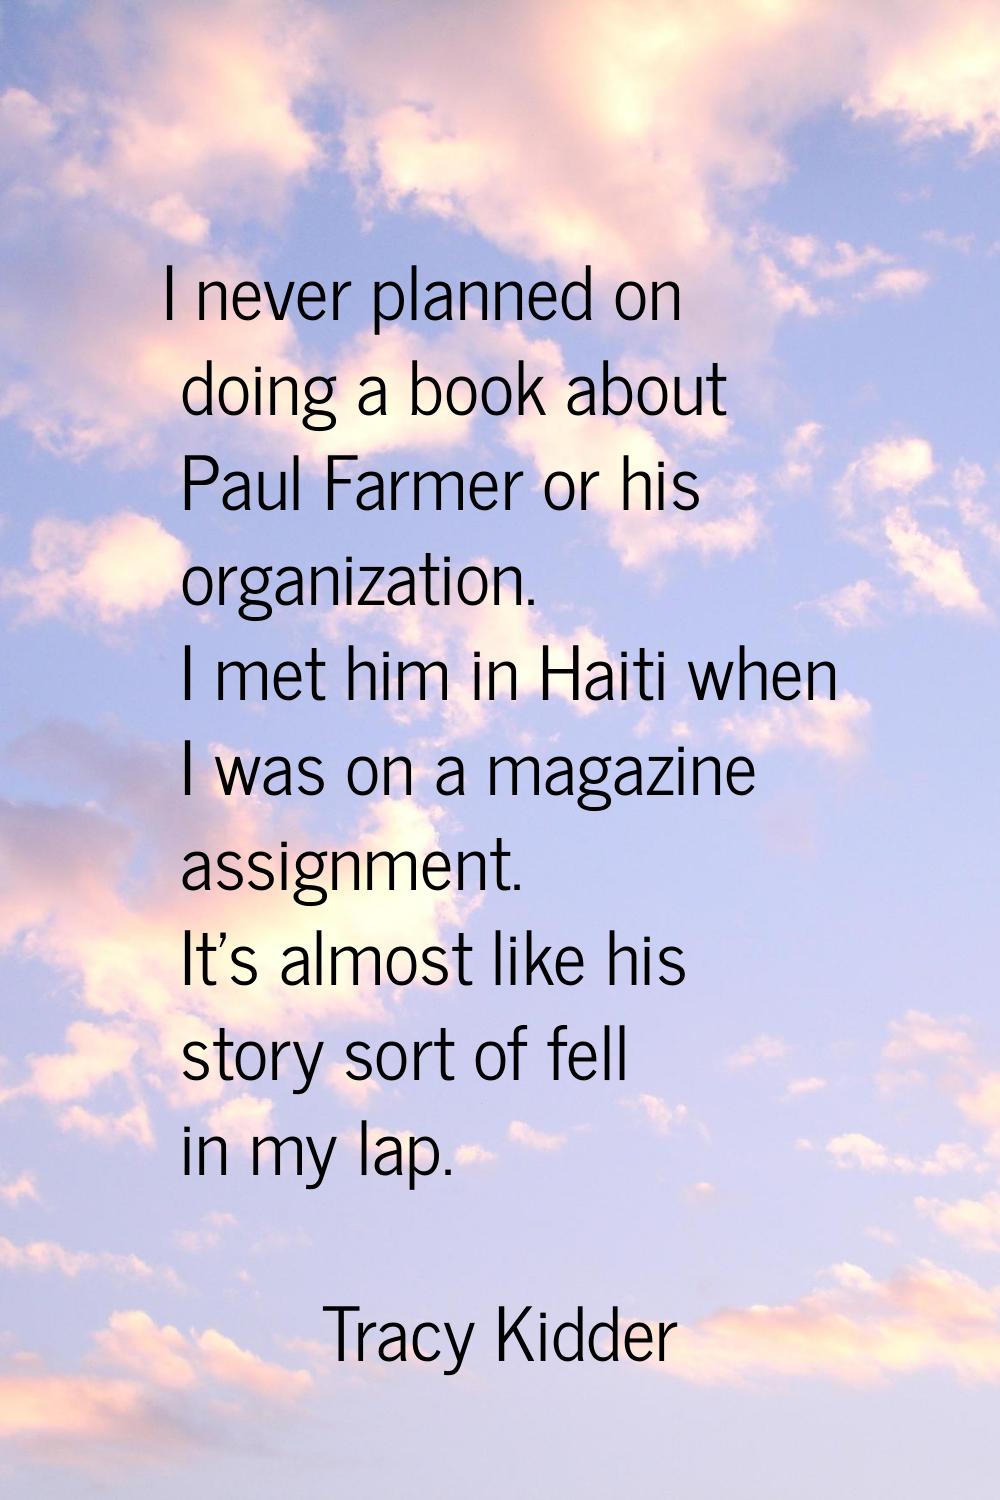 I never planned on doing a book about Paul Farmer or his organization. I met him in Haiti when I wa